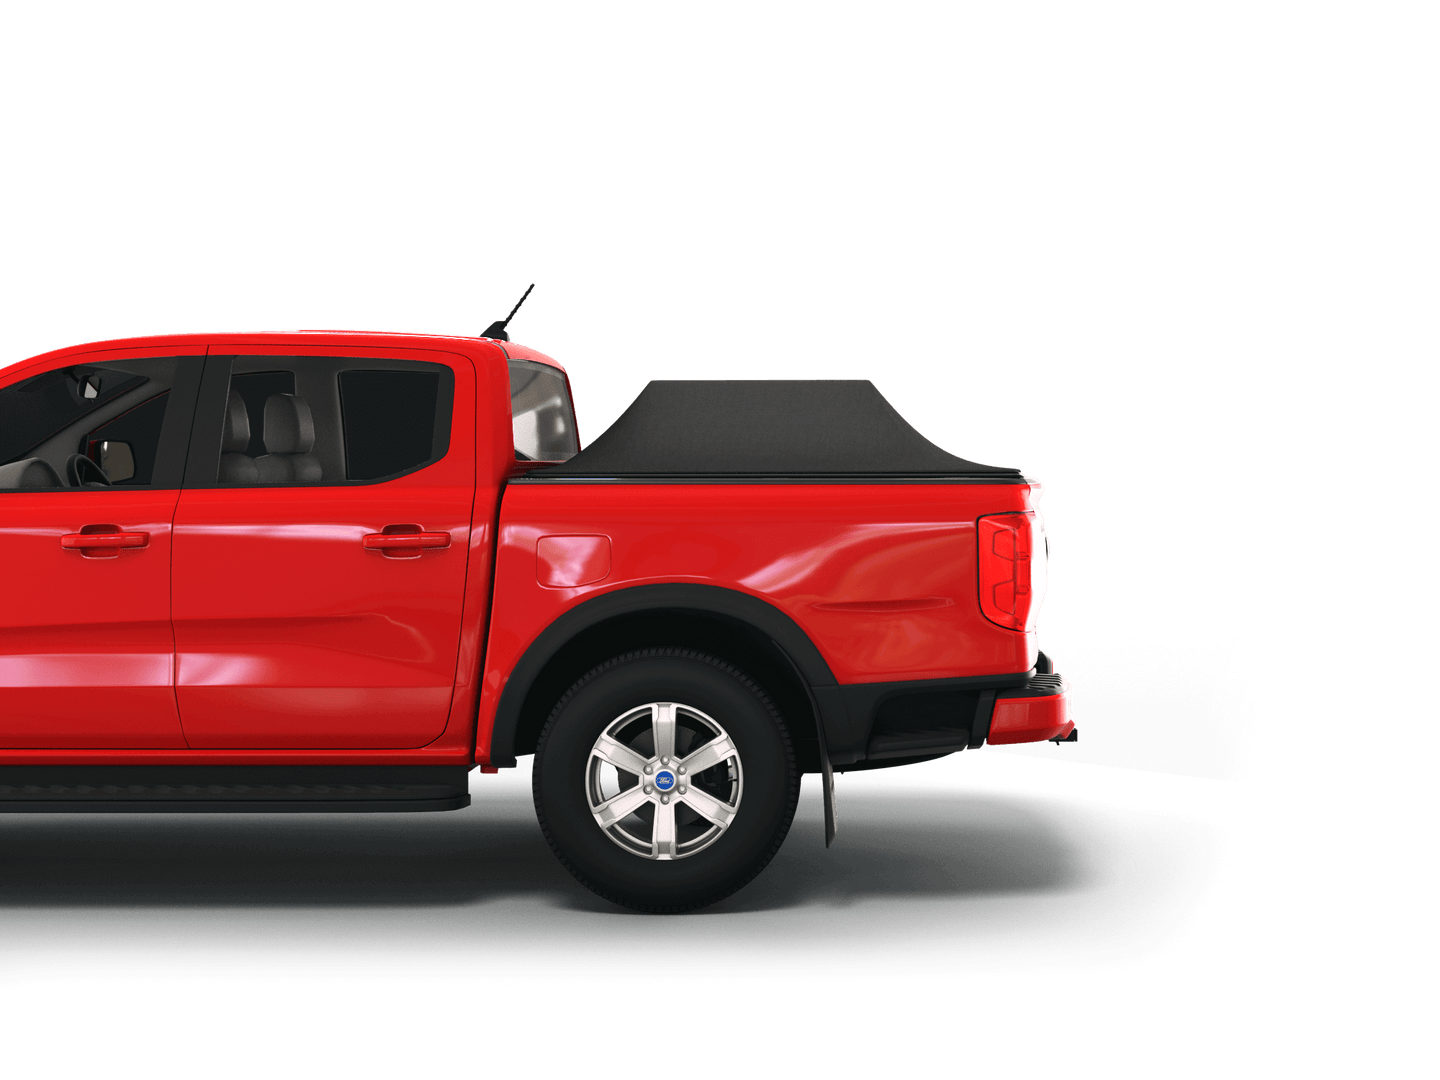 Red Ford Ranger with Sawtooth Stretch tonneau cover expanded over cargo load